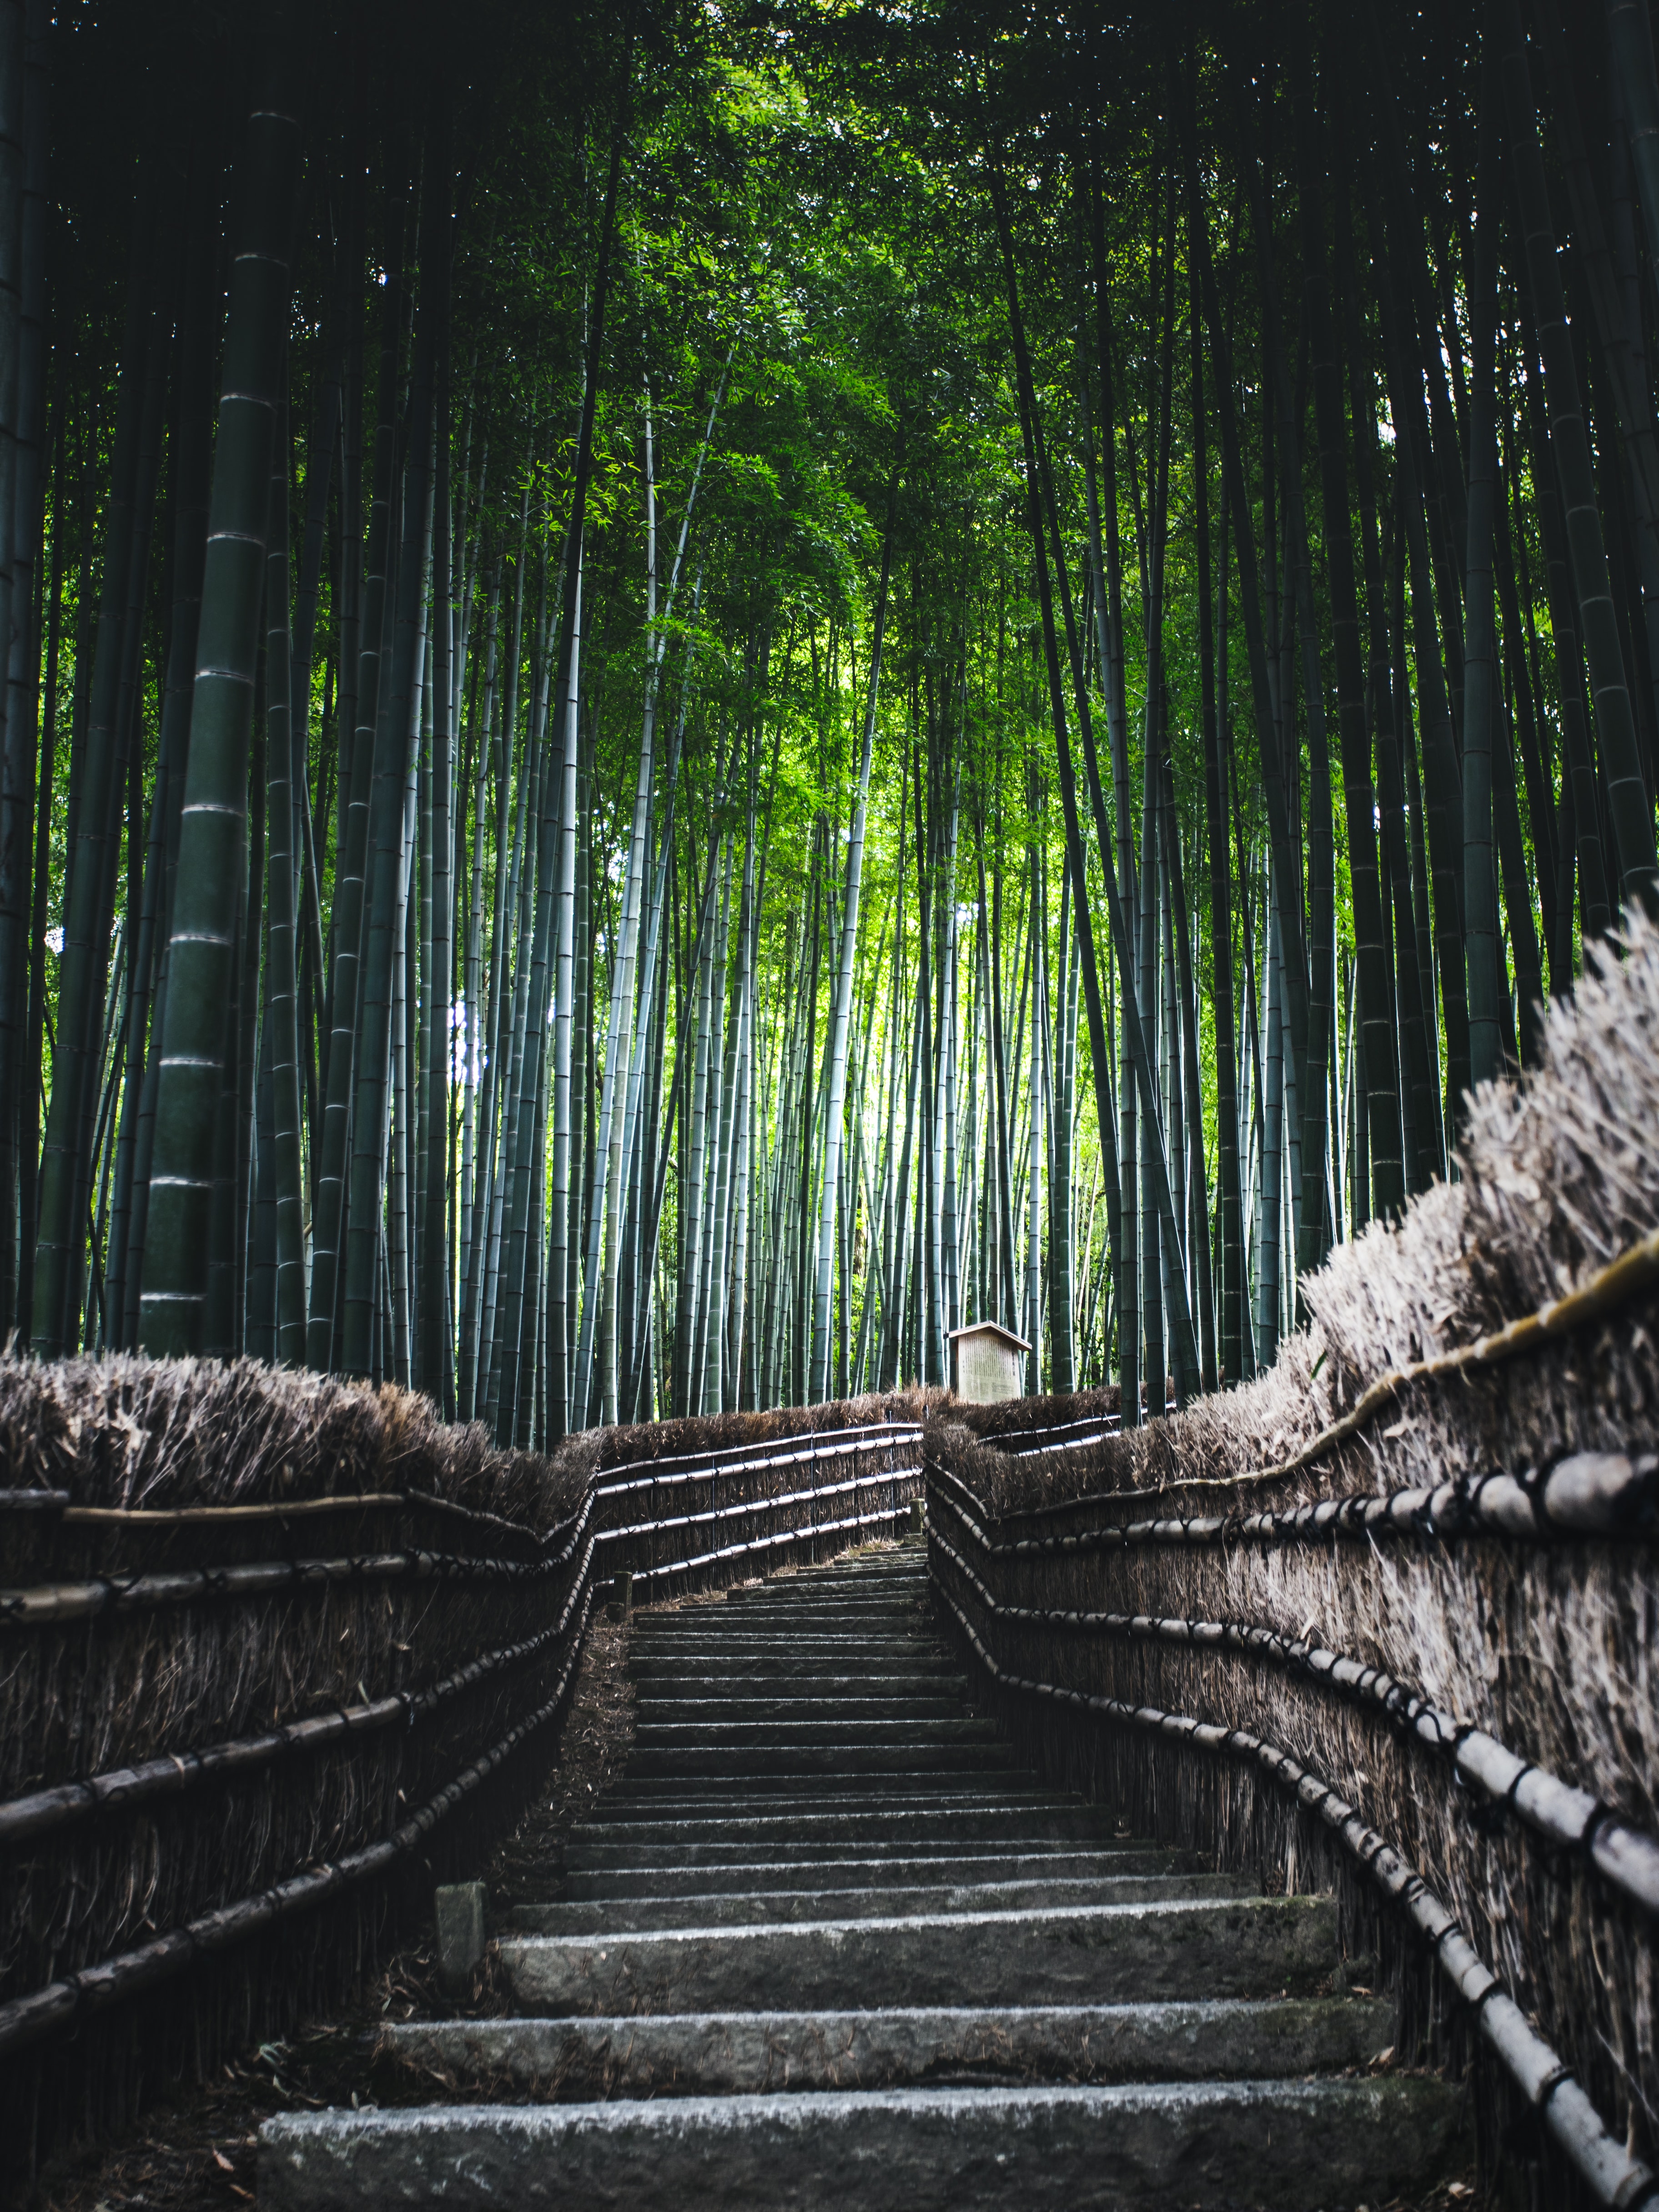 bamboo, nature, forest, trees, stairs, ladder 32K